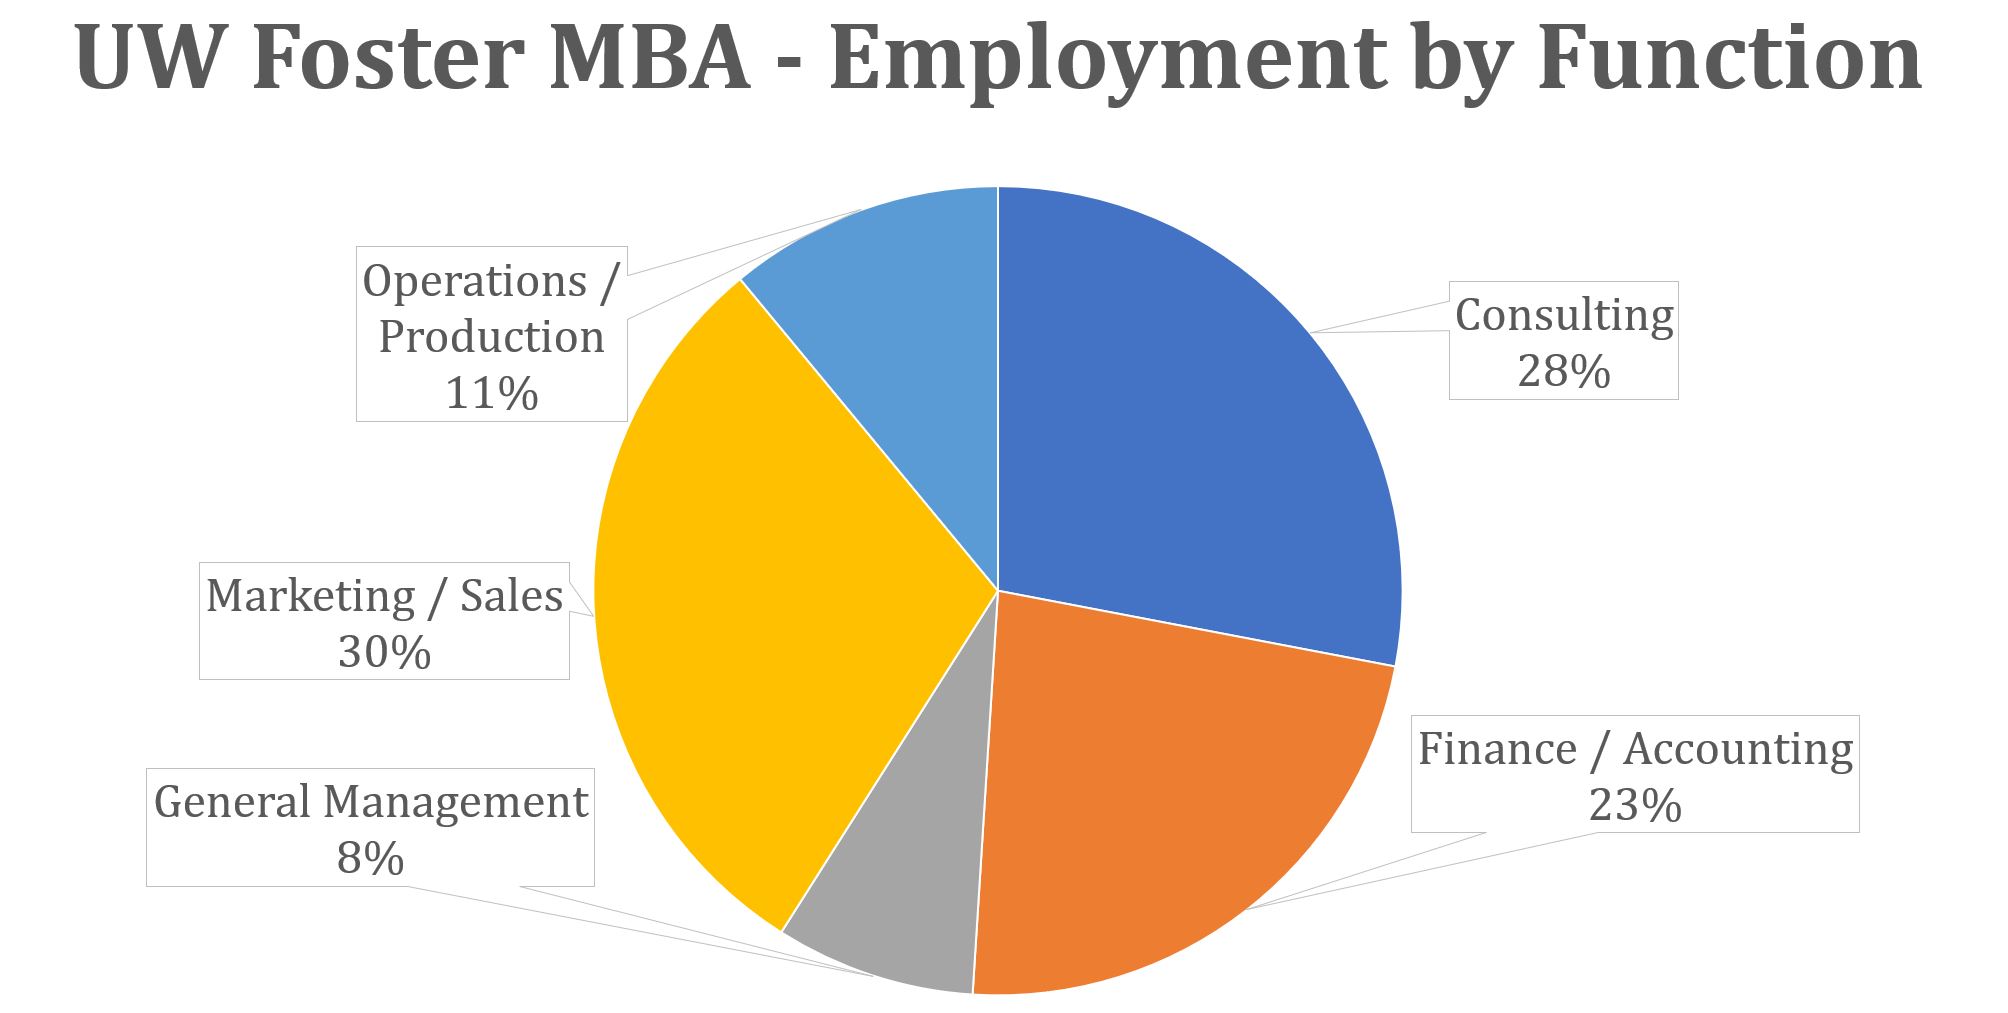 UW Foster MBA - Employment by Function